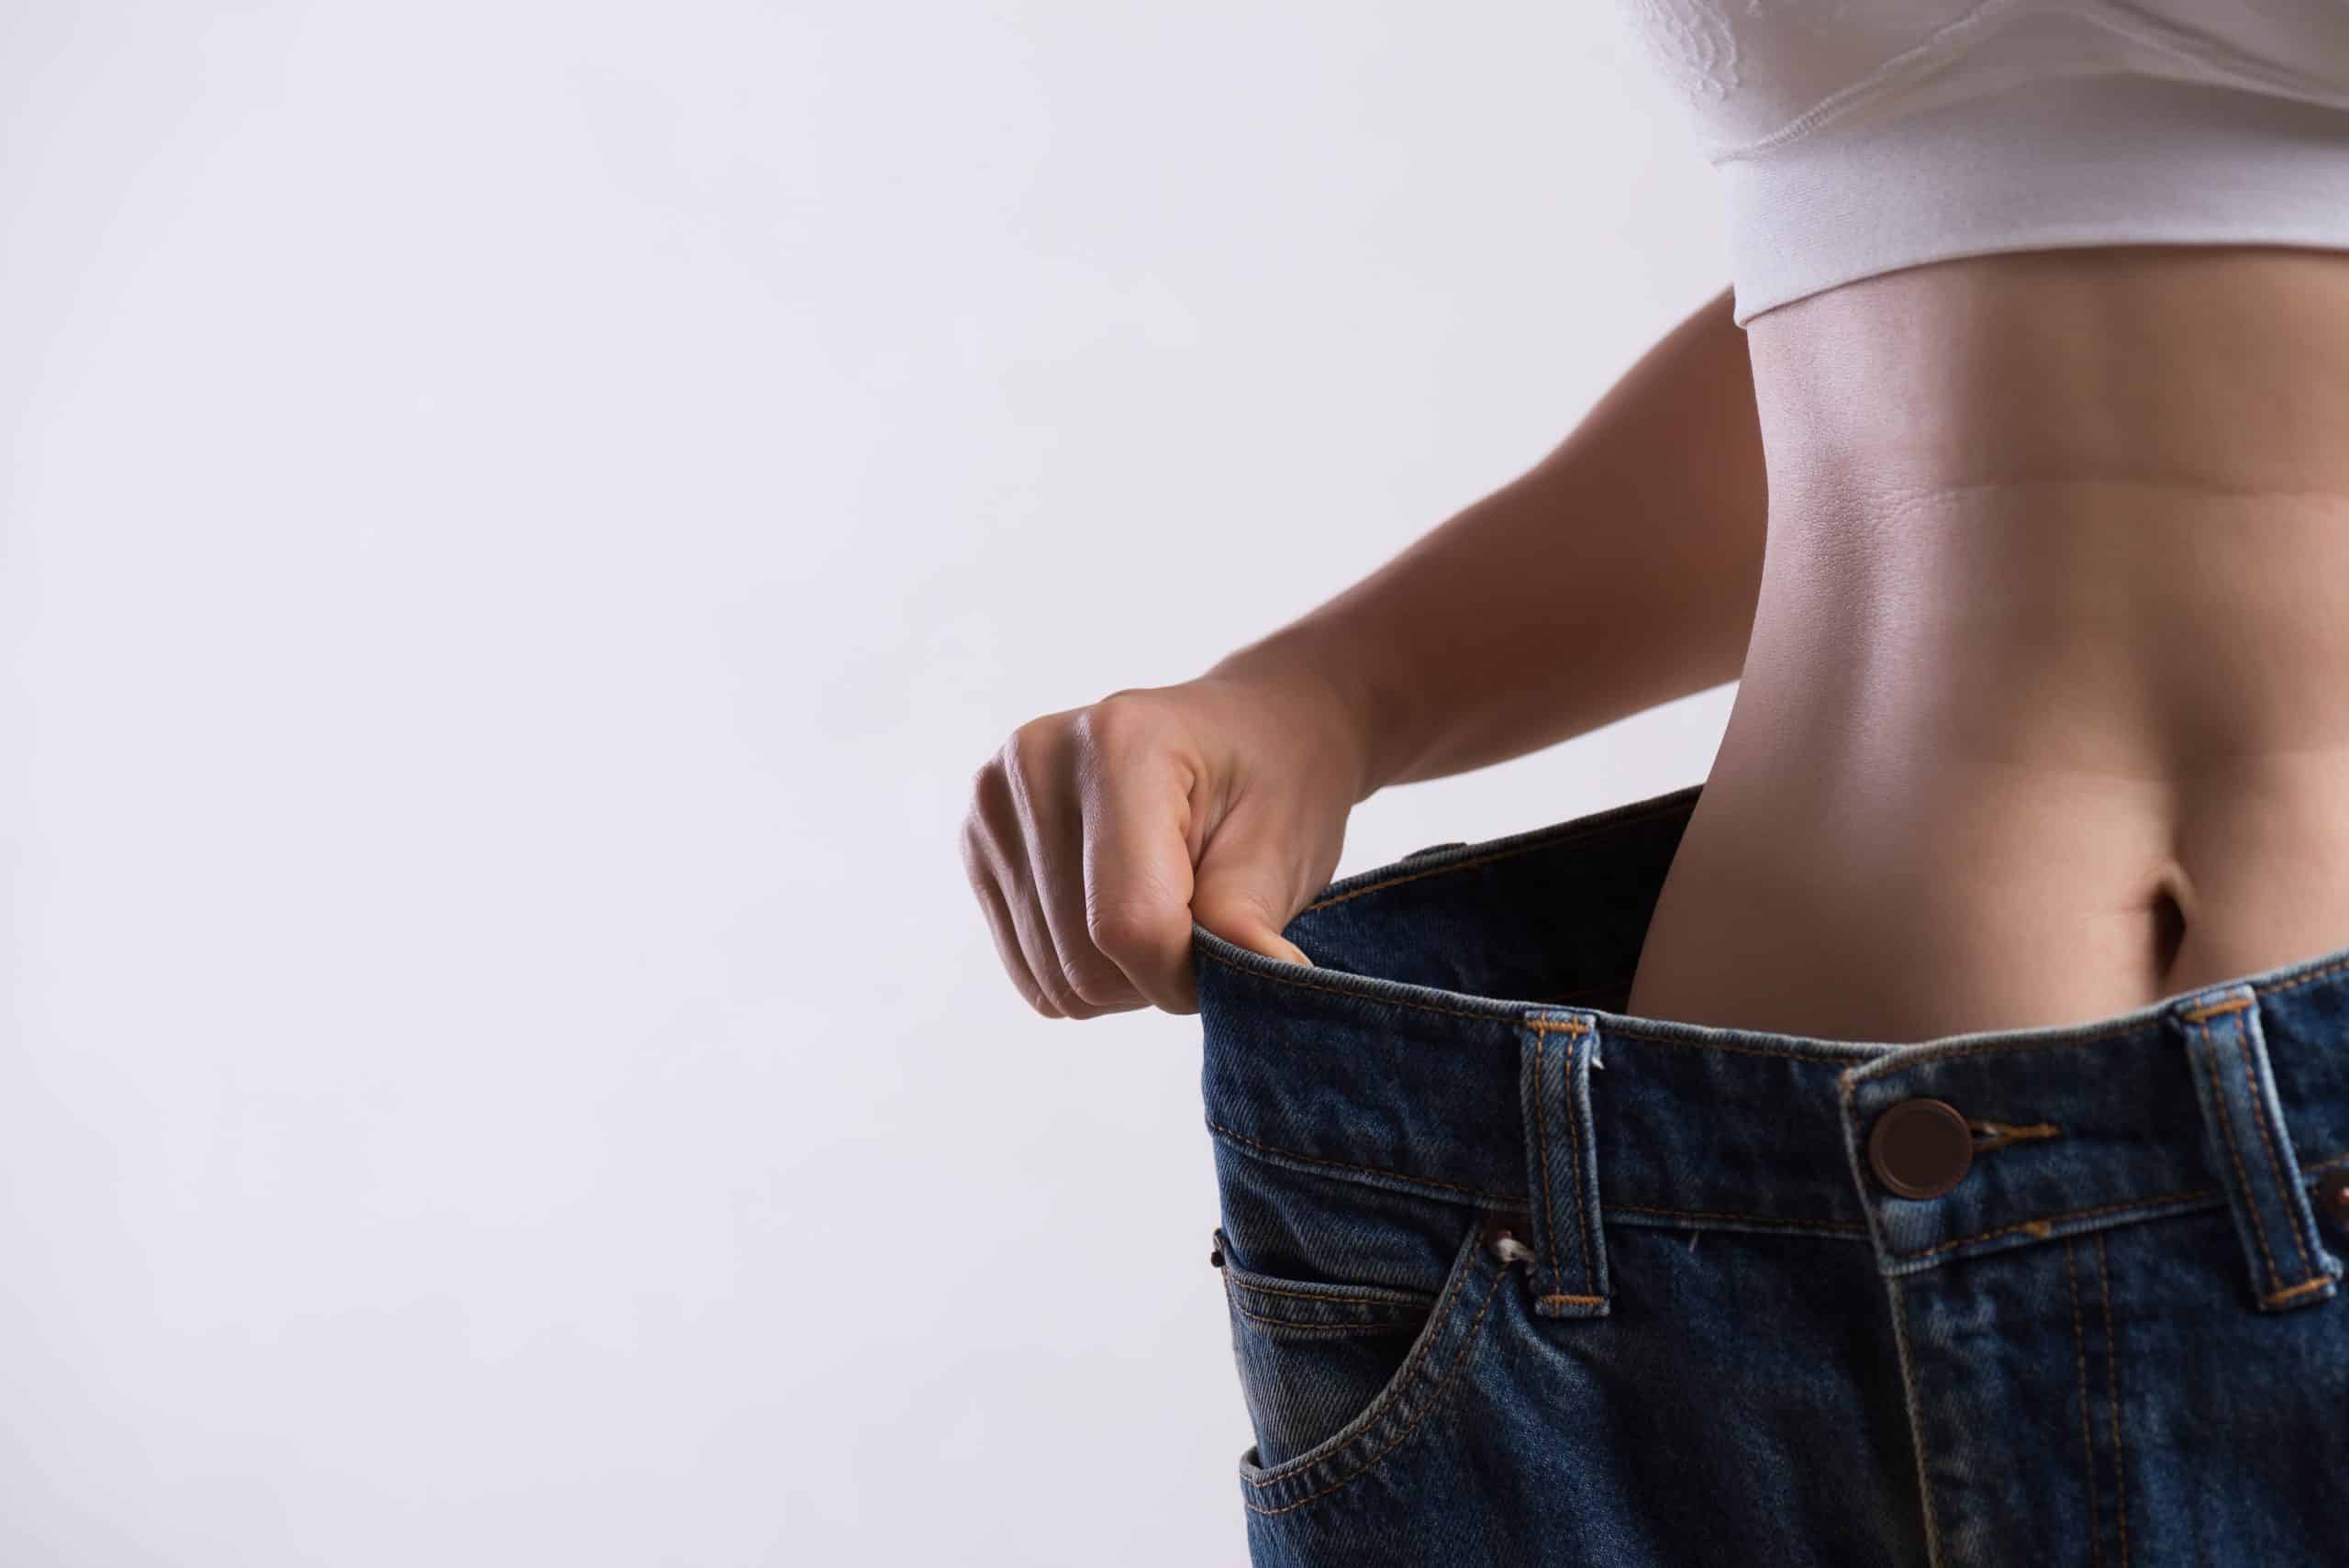 Why am I not losing weight on Phentermine?